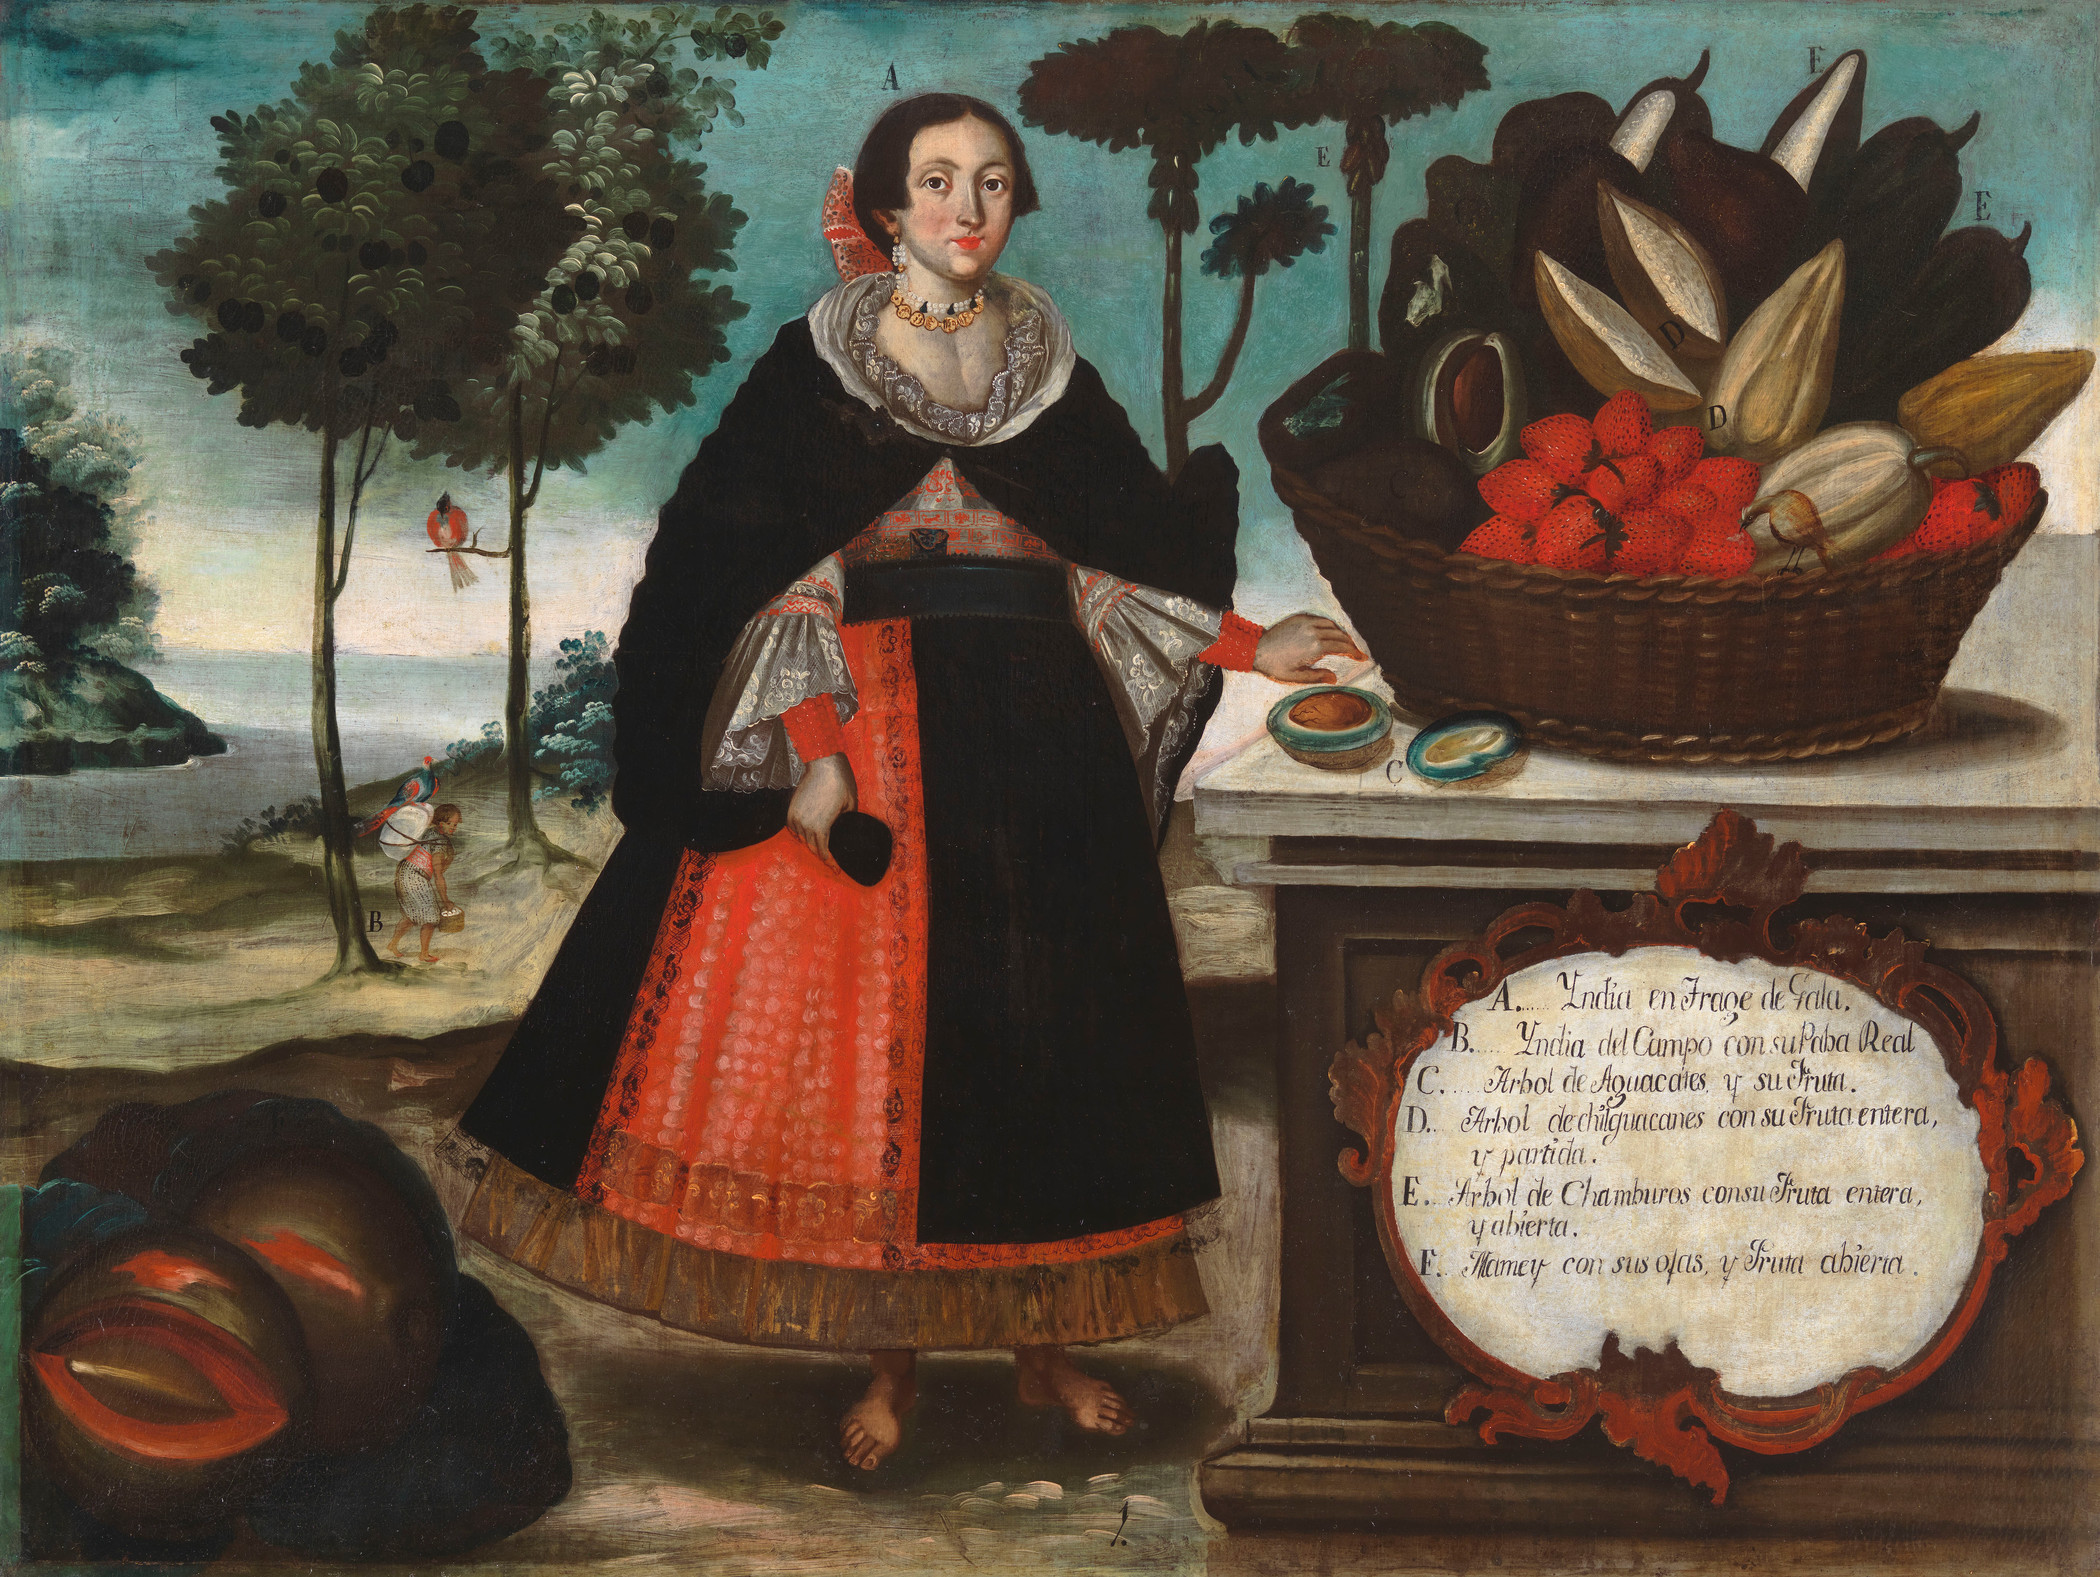 Colorful oil painting of a Native South American woman wearing a gold necklace, a white lace sleeved blouse, a red skirt, and a black overcoat standing next to a basket of large tropical fruit on a wooden stand. Fruit-filled trees and water are visible in the background.